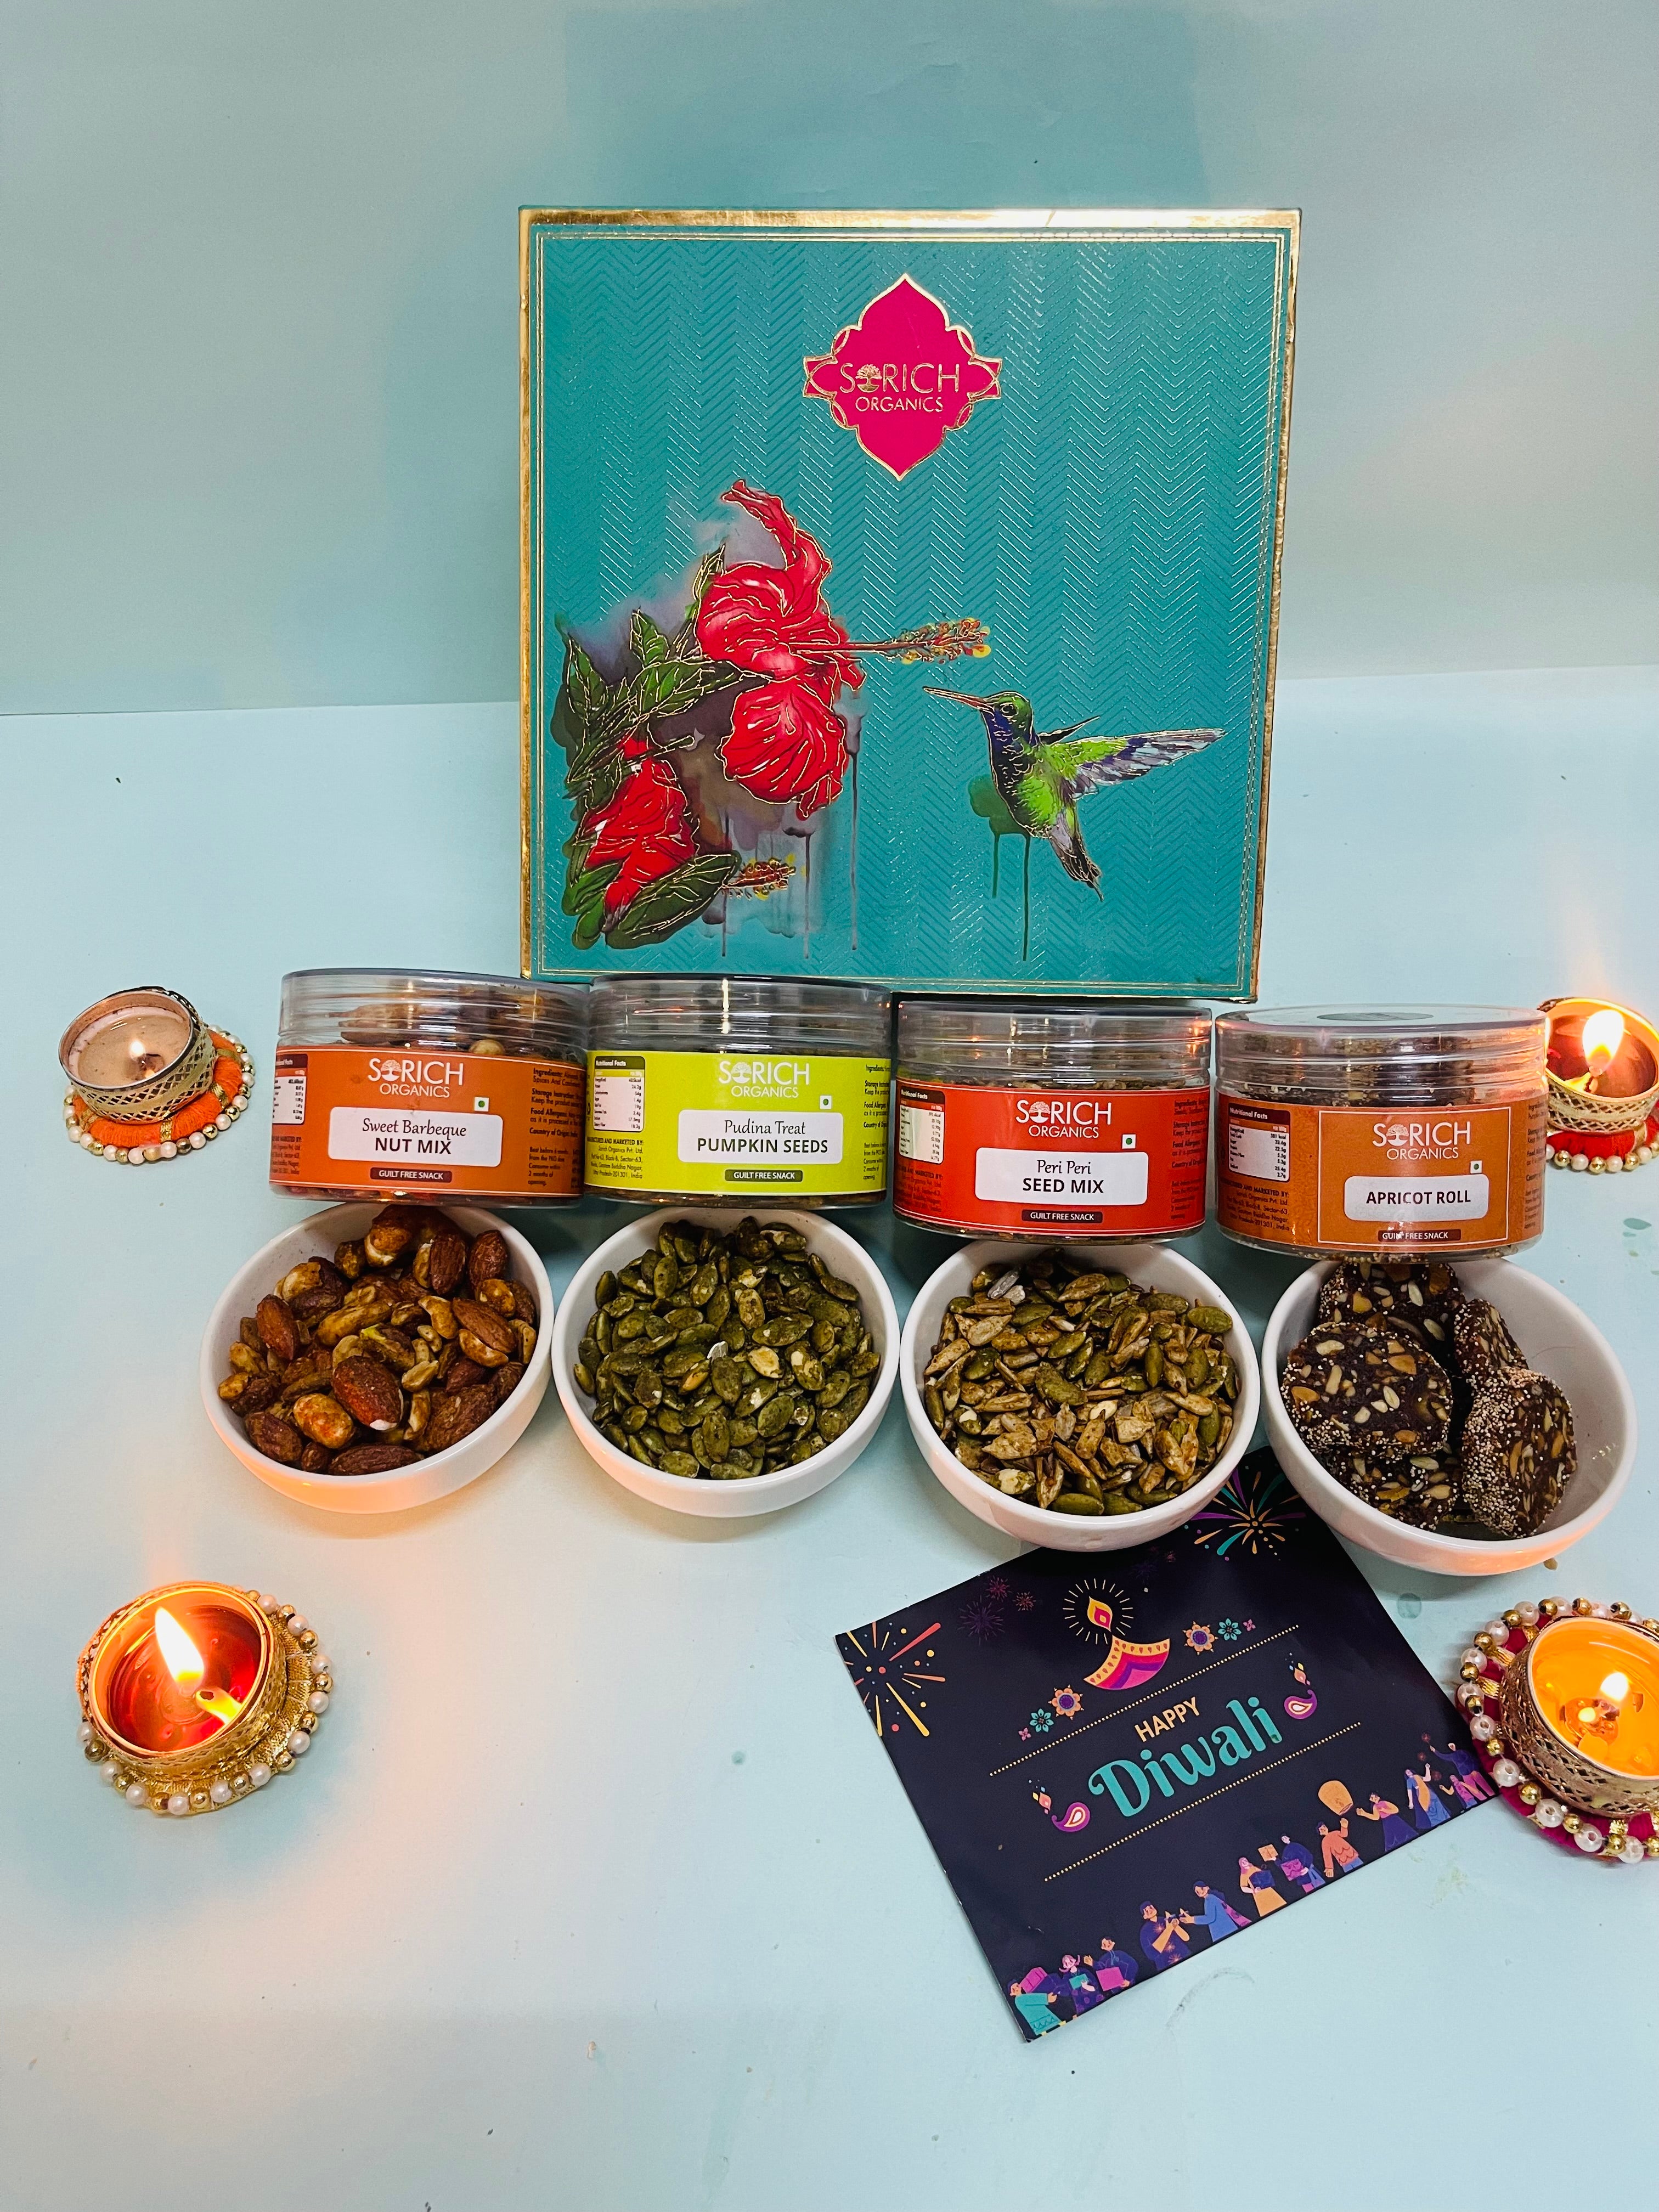 Diwali Special Festive Intense Pack for Family and Friends | Sweet BBQ Nut Mix 150g, Peri Peri Seeds Mix 150g, Pudina Pumpkin Seeds 150g, Apricot Roll 150g - Sorich